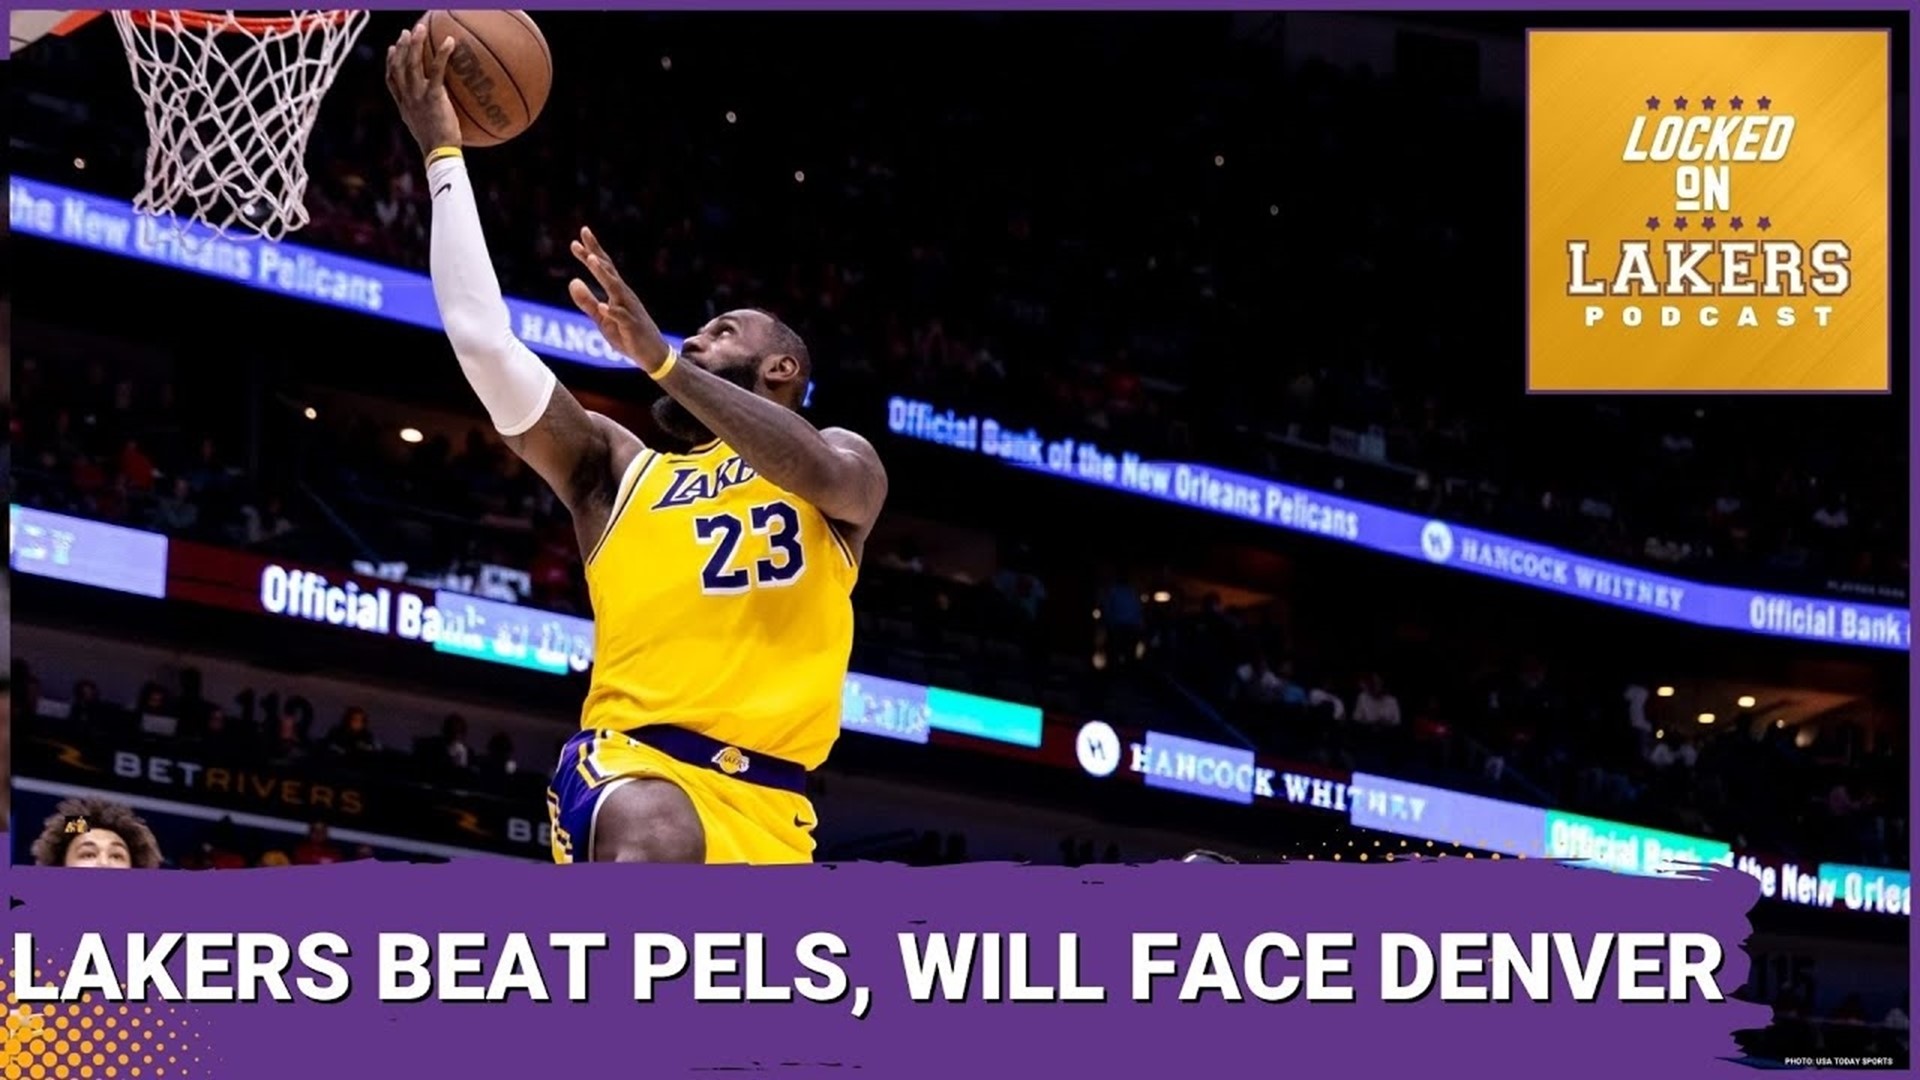 This win didn't quite look like the others, but in the end the Lakers got what they came for, and once again defeated the New Orleans Pelicans.